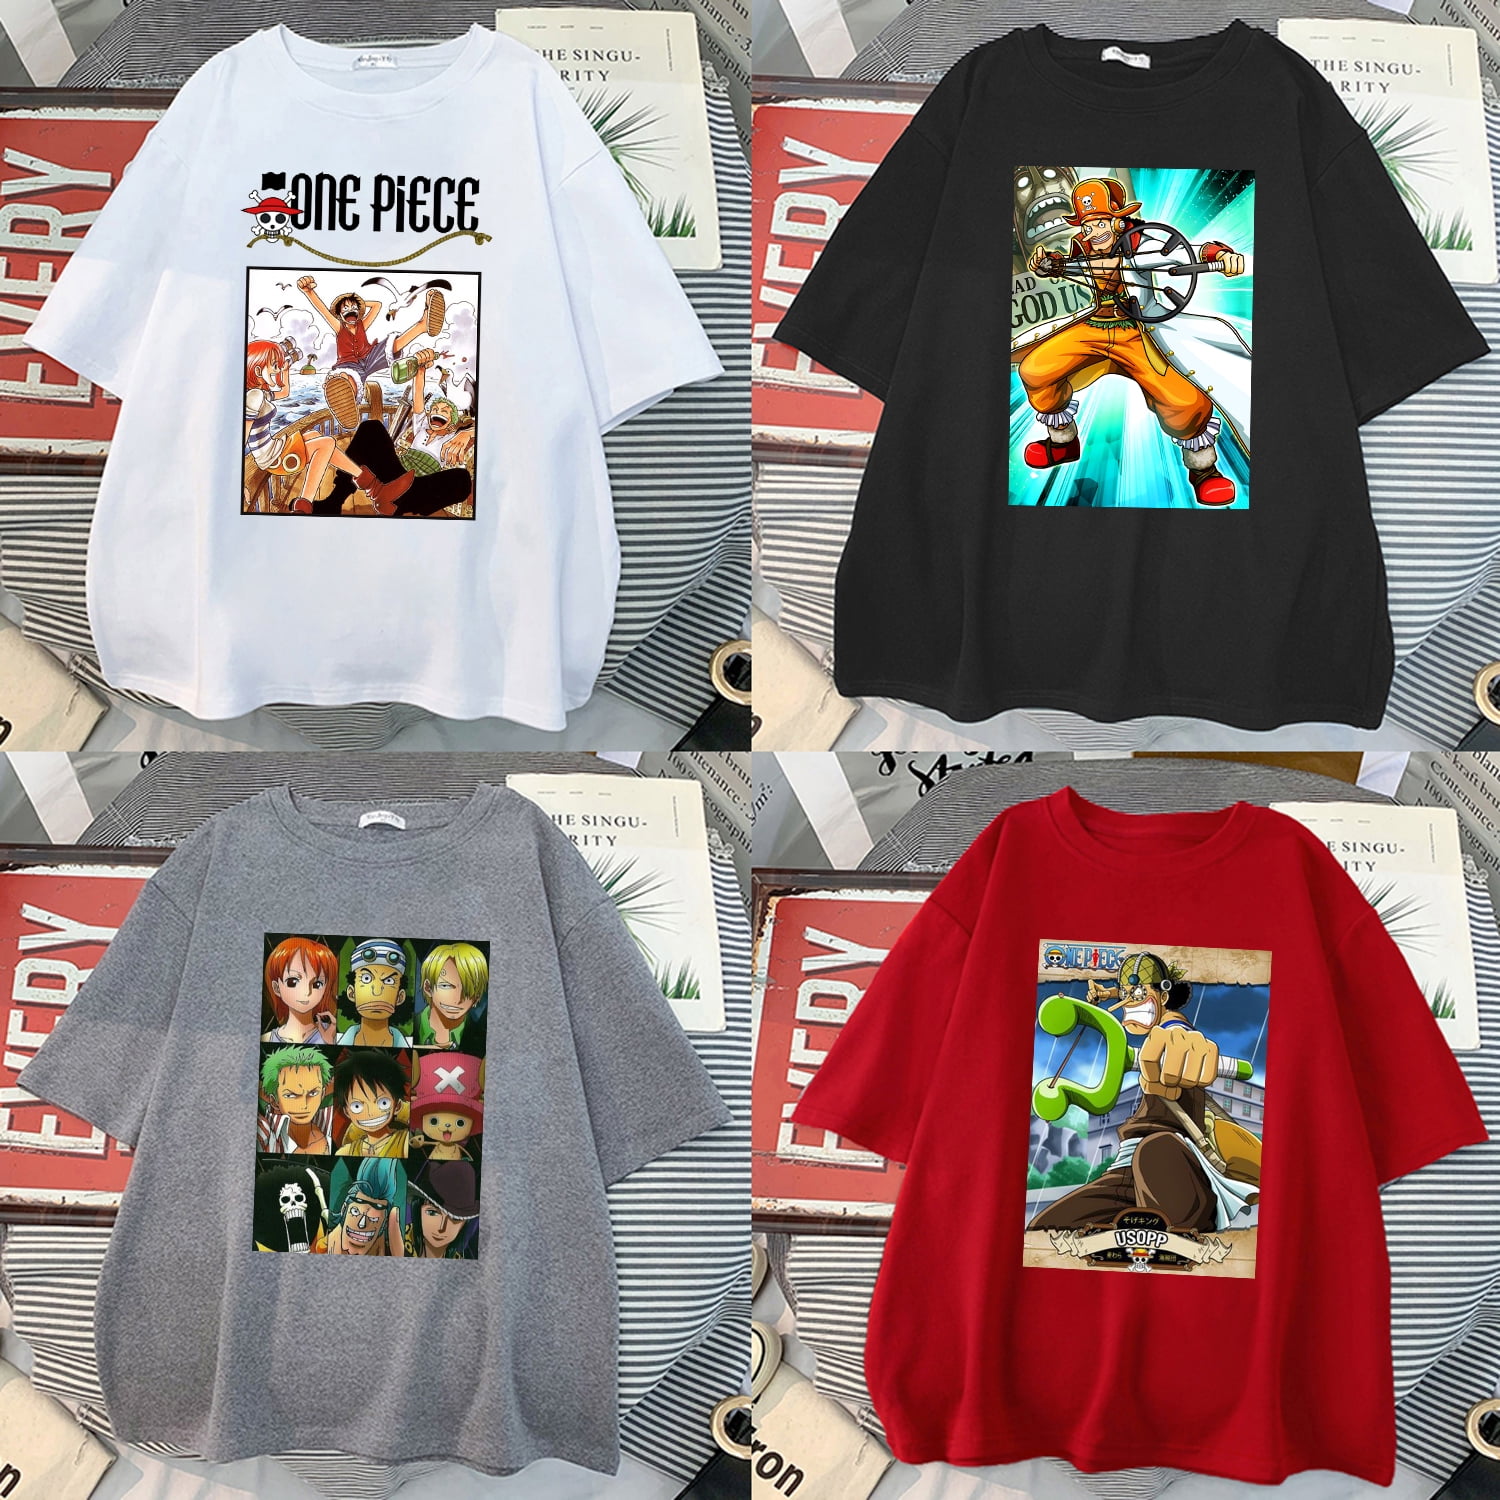 One Piece Japanese Anime T Shirts Black White Gray Red for Round Neck Children Tee for Kids Unique Unisex T-shirt Tops - Walmart.com